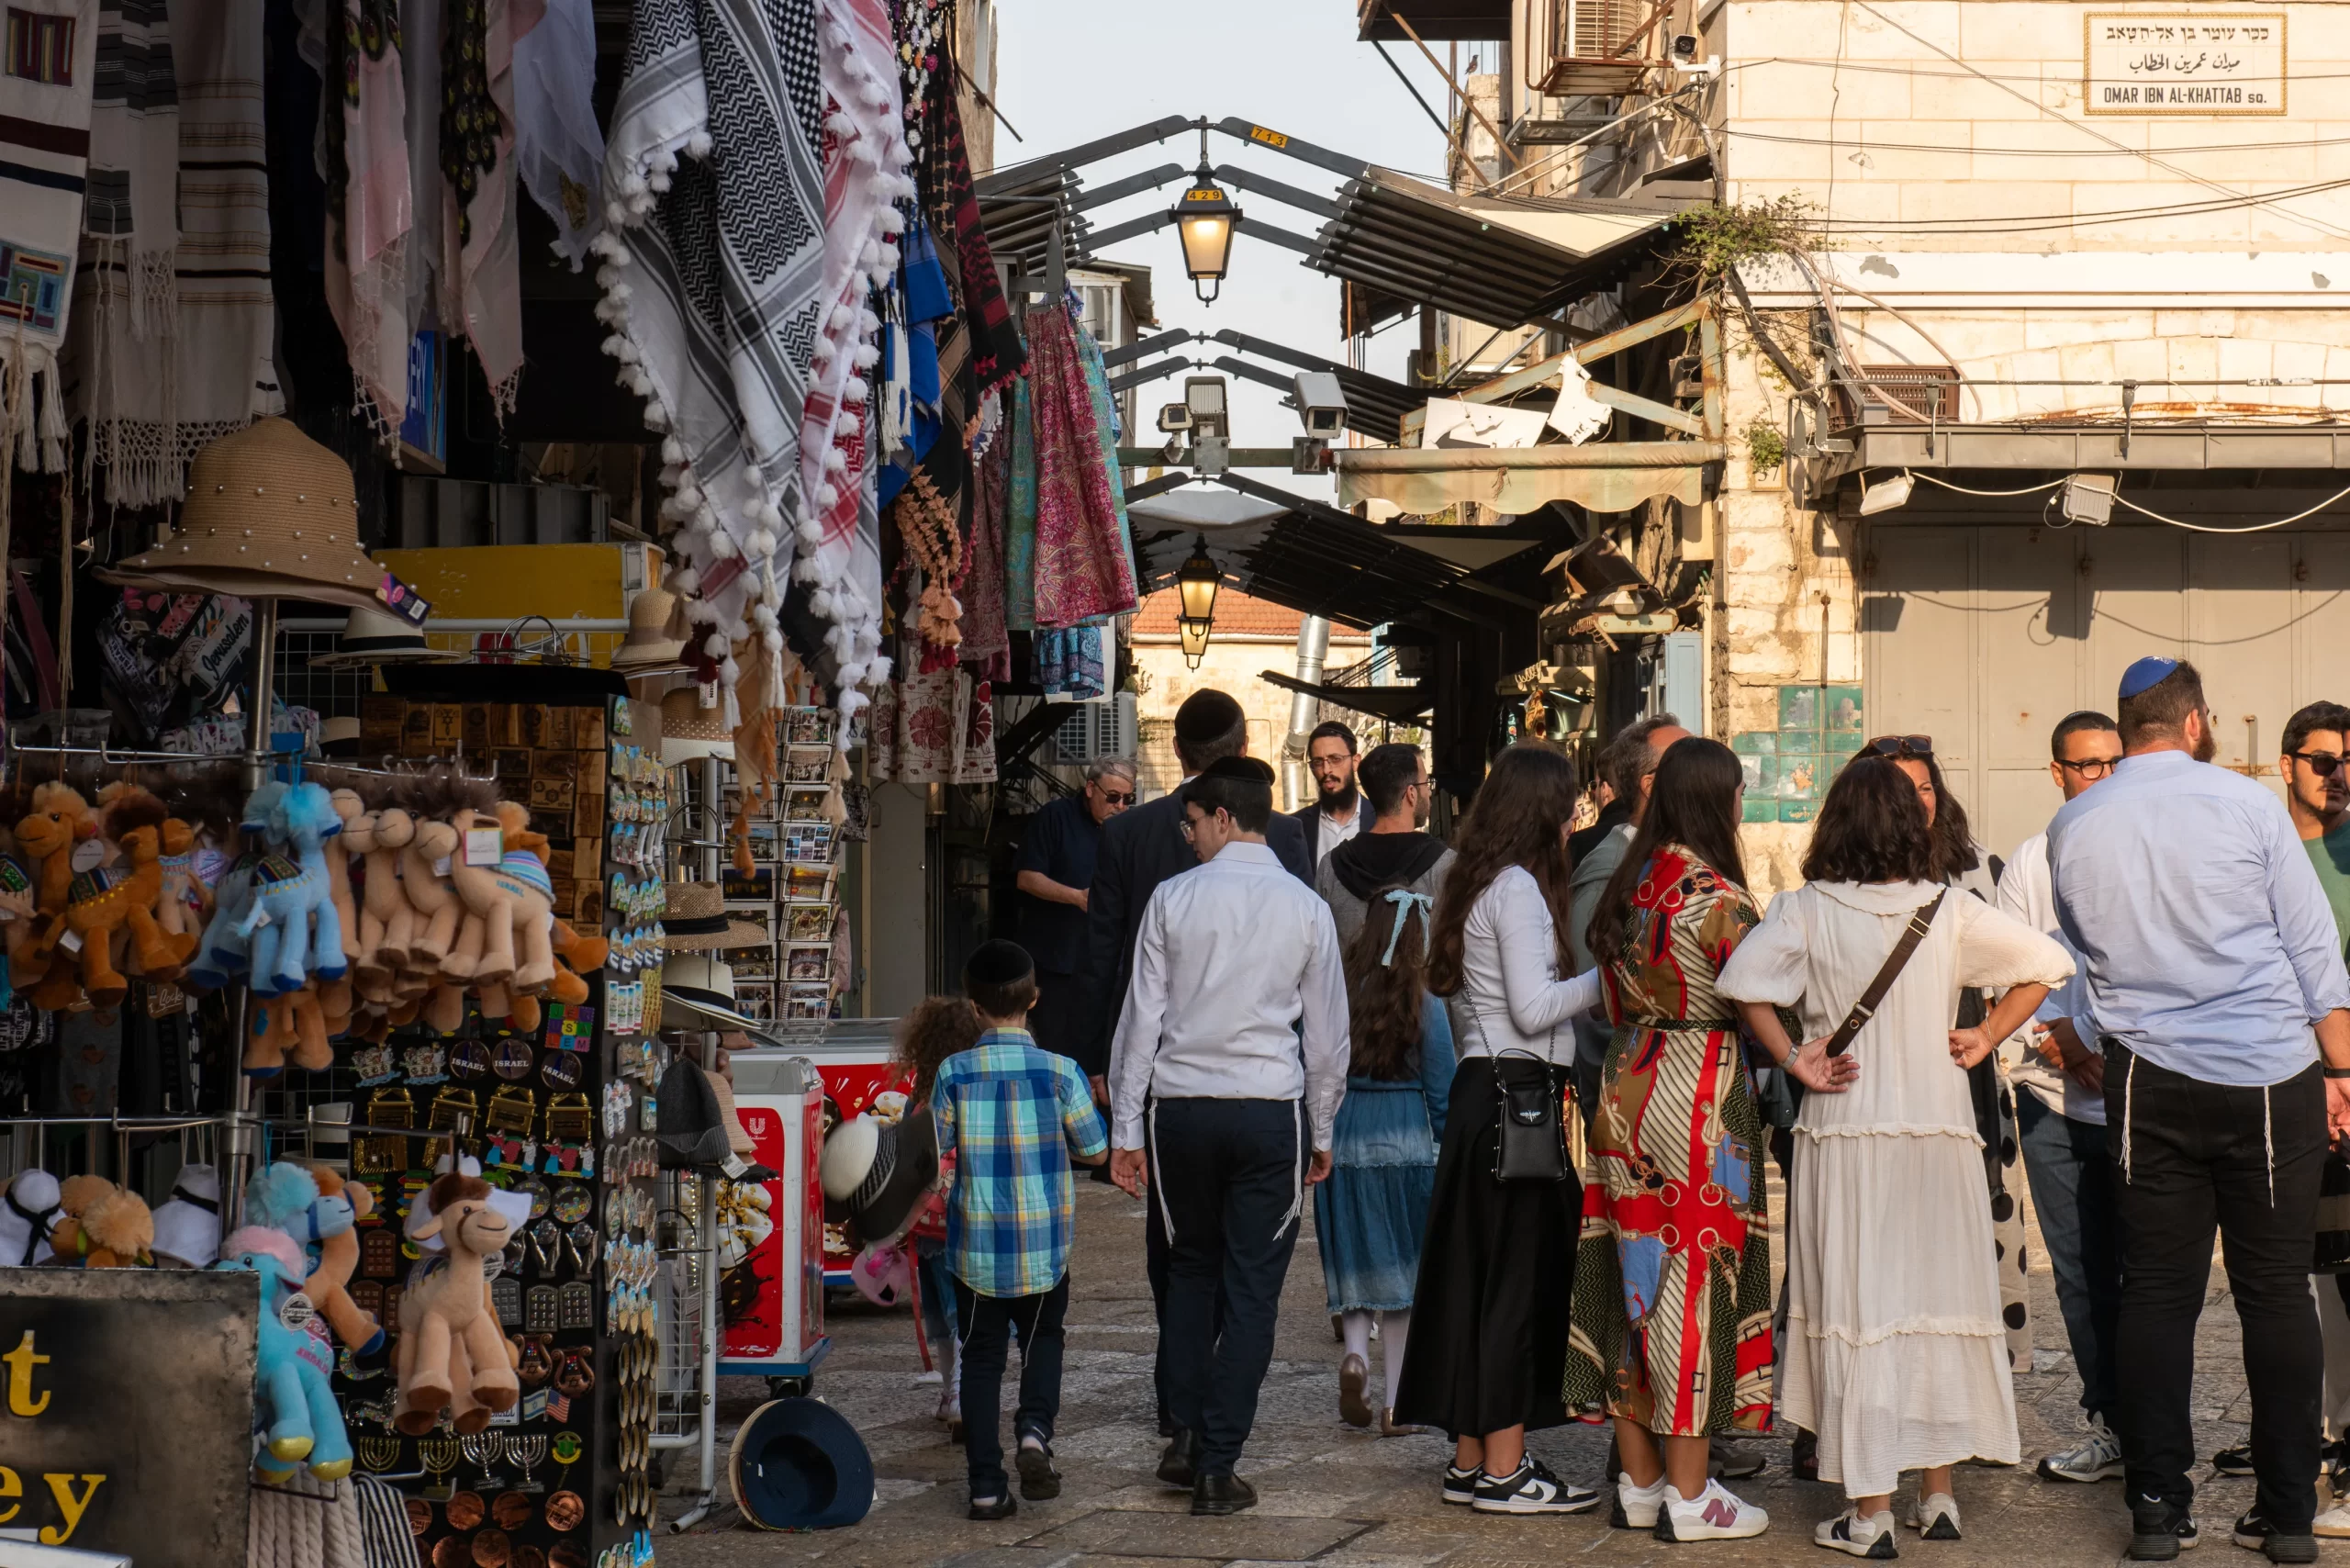 A religious Jewish family/group at the entrance of the Christian souk, from Jaffa Gate, in April 2024. Many Jews use this street to go to the Western Wall. Credit: Marinella Bandini